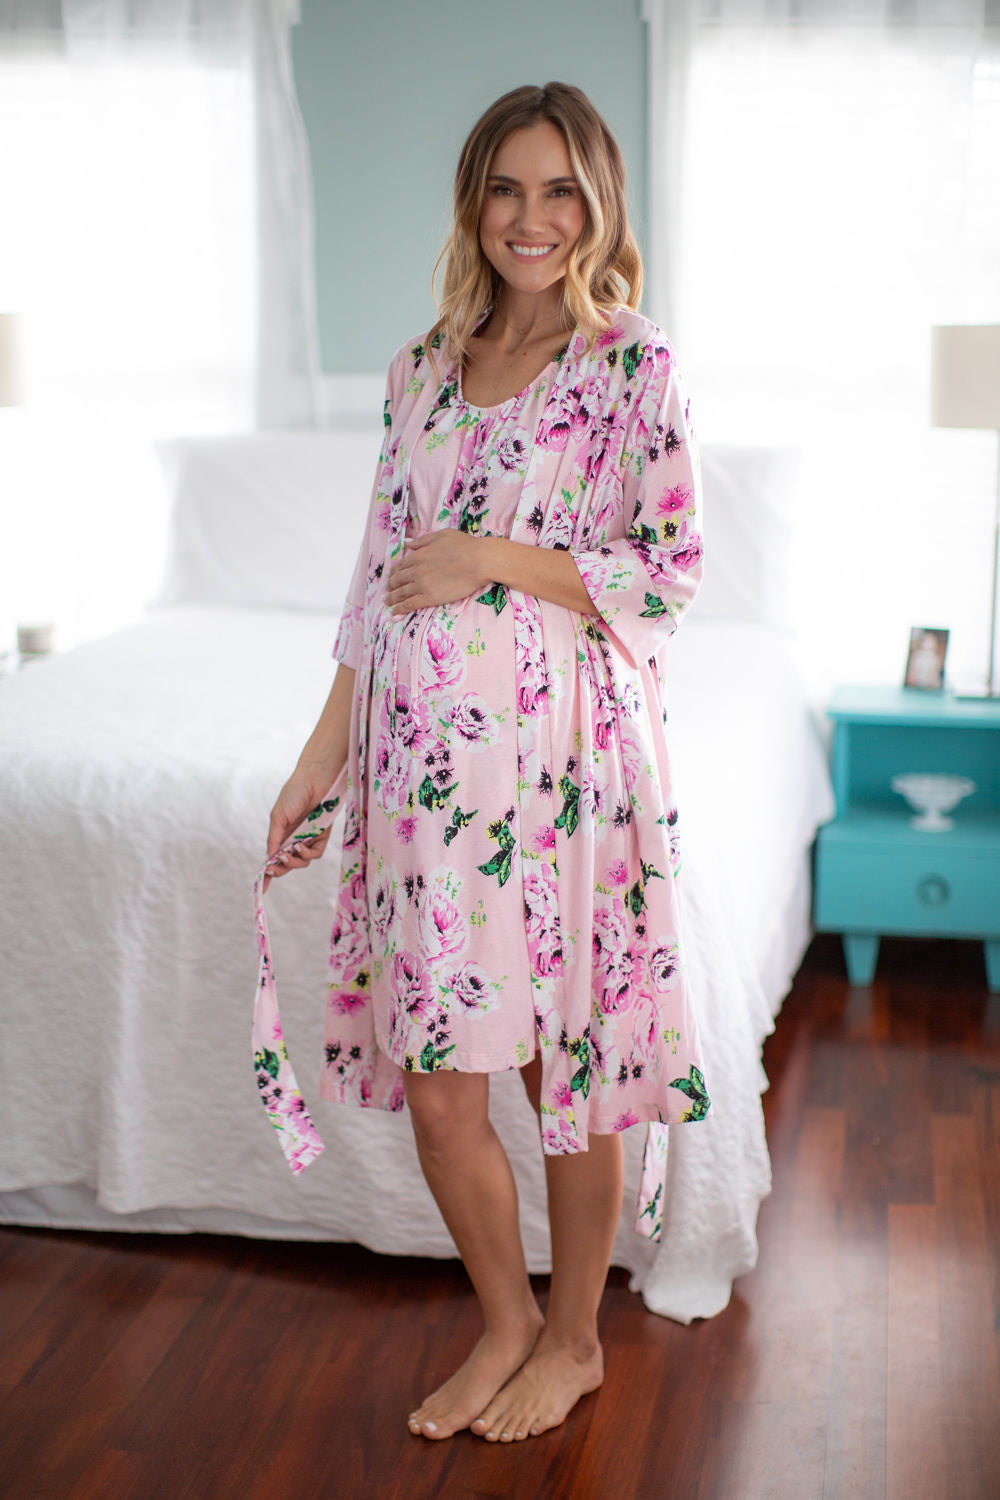 Floral Labor & Delivery Gown  Birthing Gown - Milk & Baby – Milk & Baby